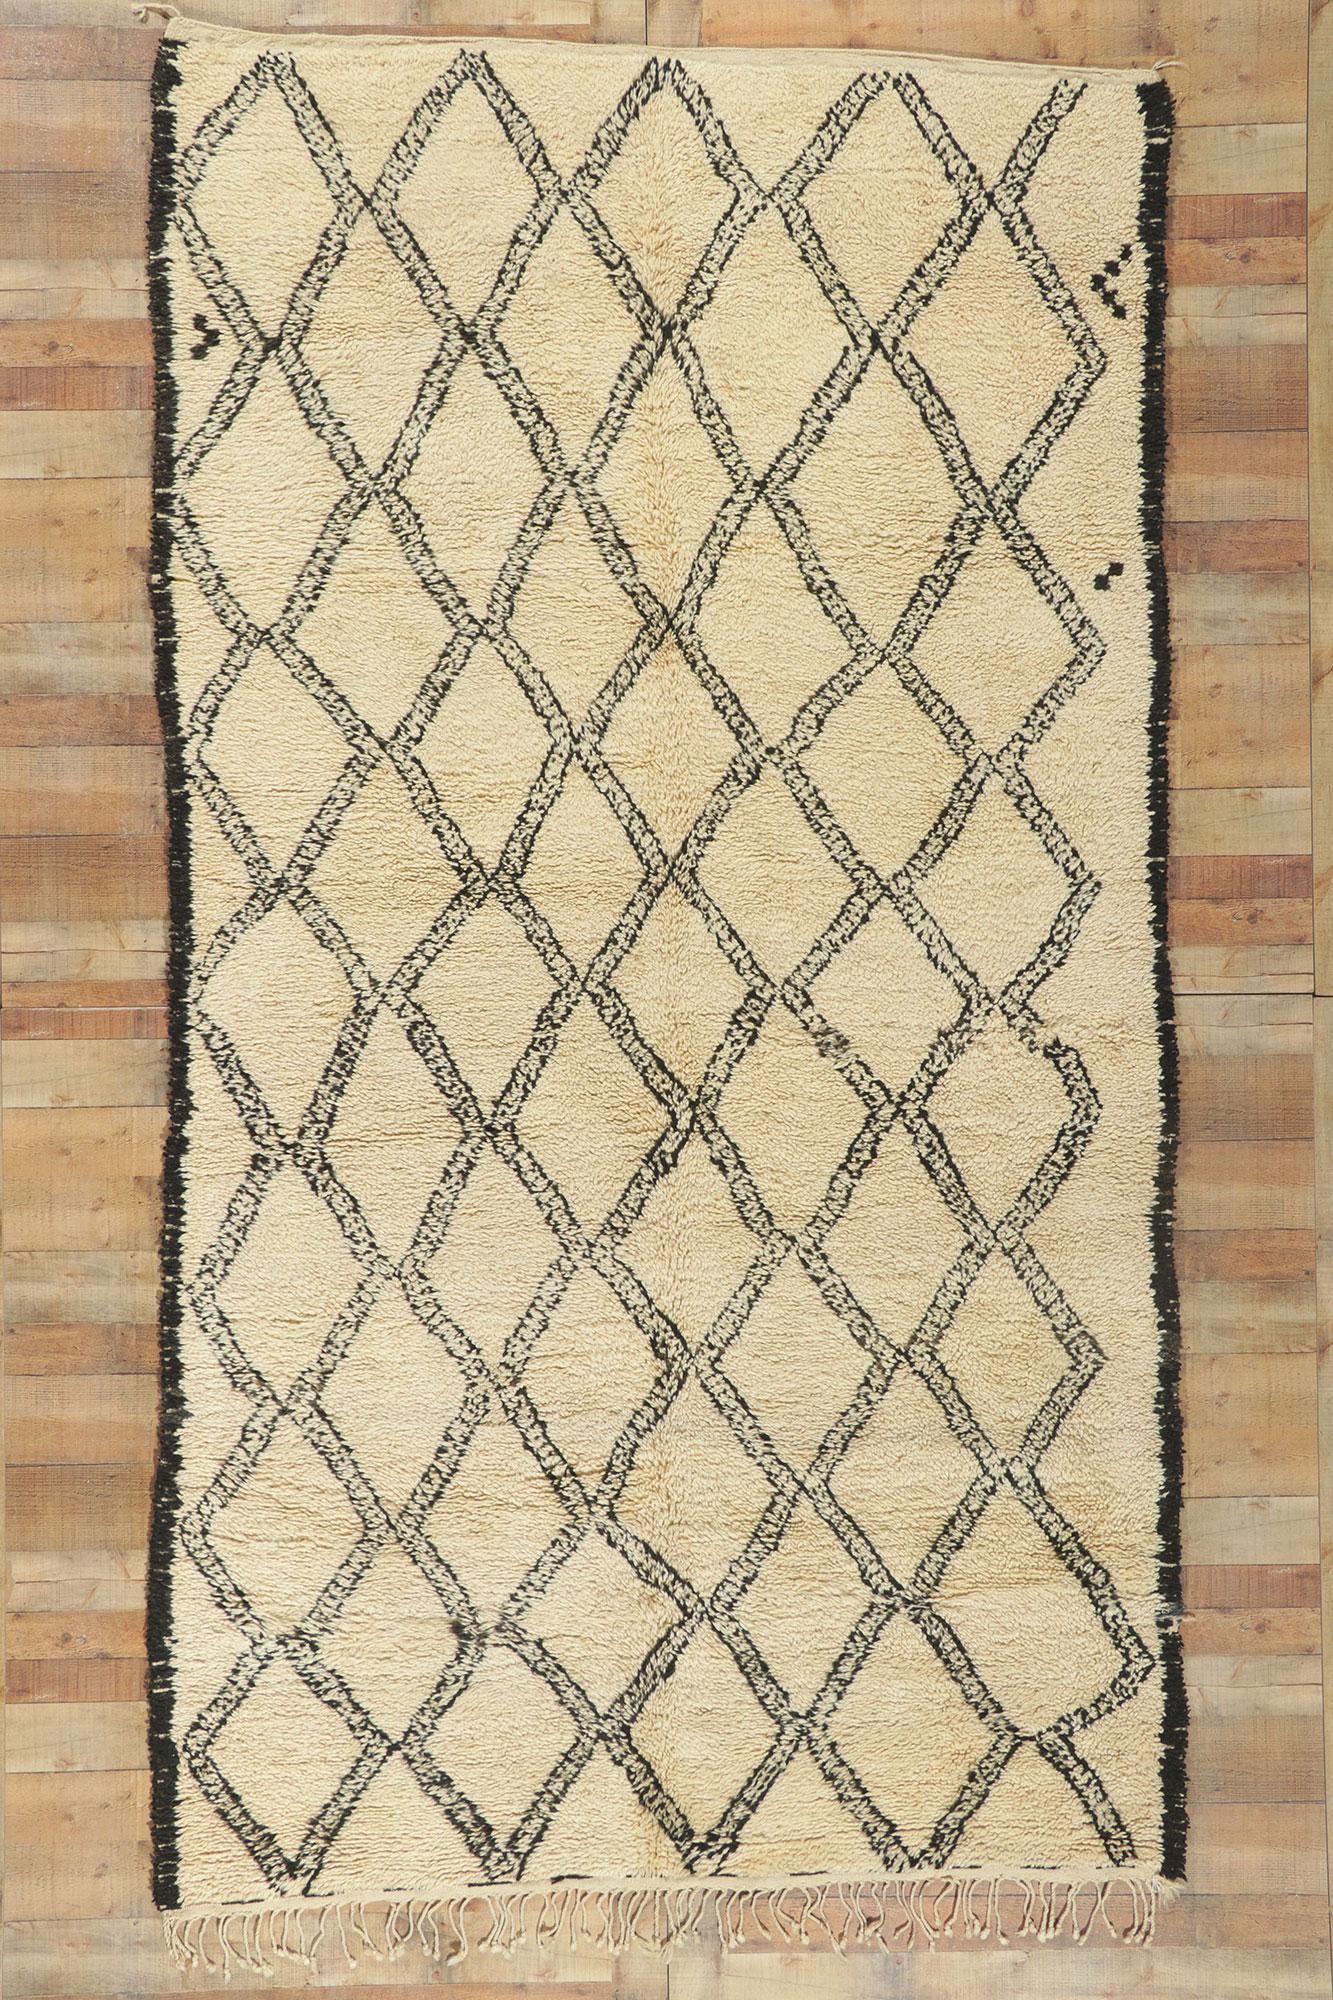 Vintage Moroccan Beni Ourain Rug In Good Condition For Sale In Dallas, TX